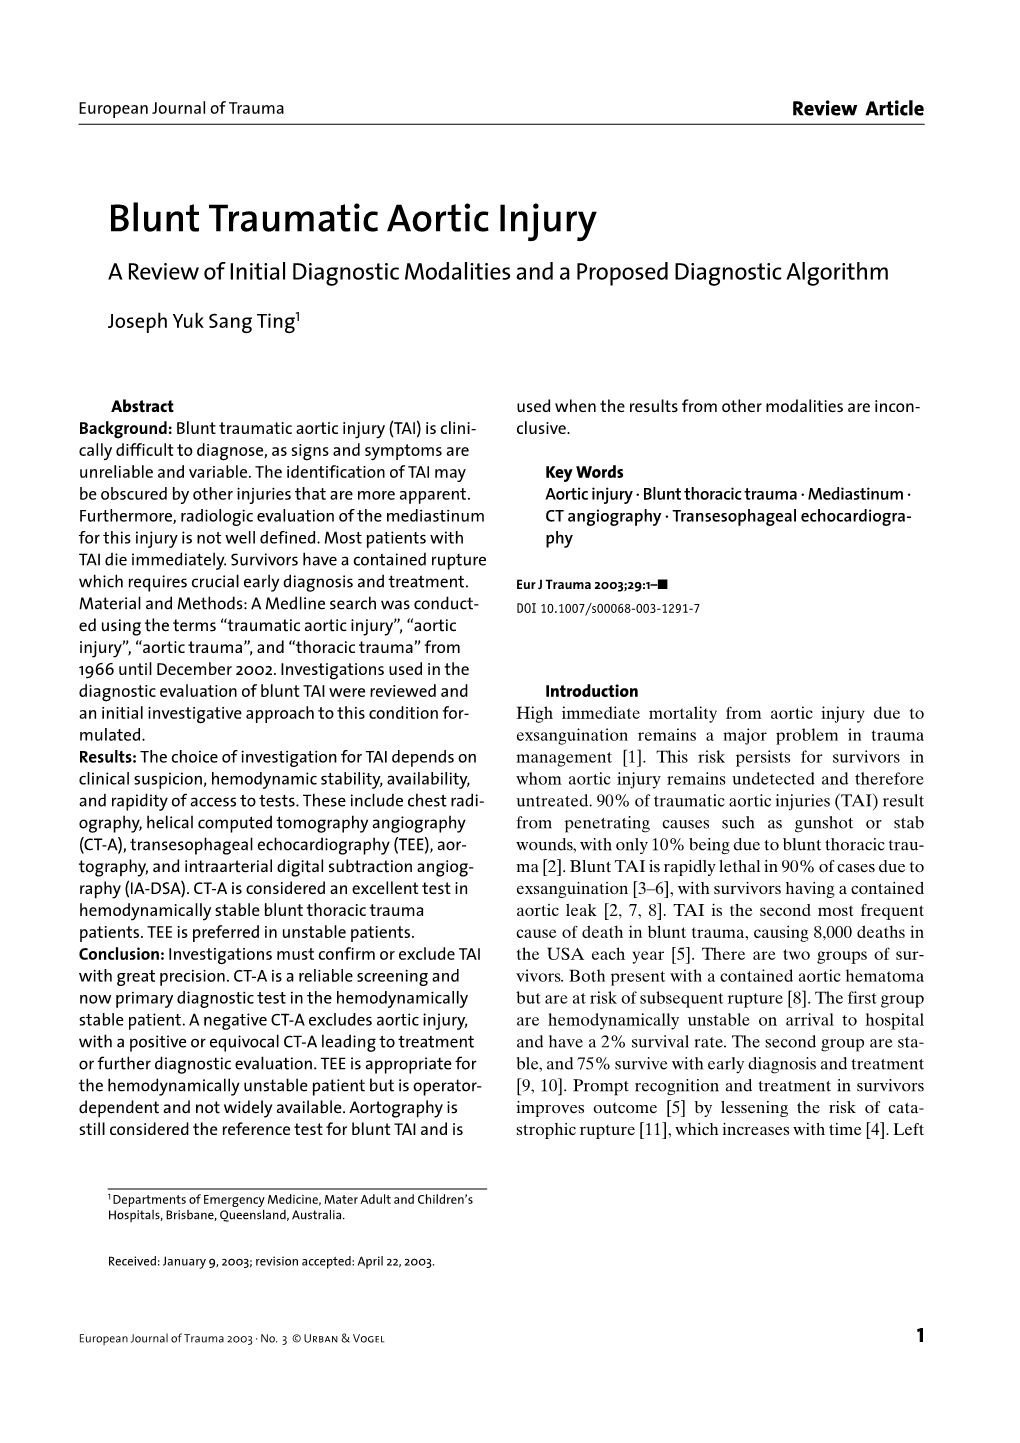 Blunt Traumatic Aortic Injury a Review of Initial Diagnostic Modalities and a Proposed Diagnostic Algorithm